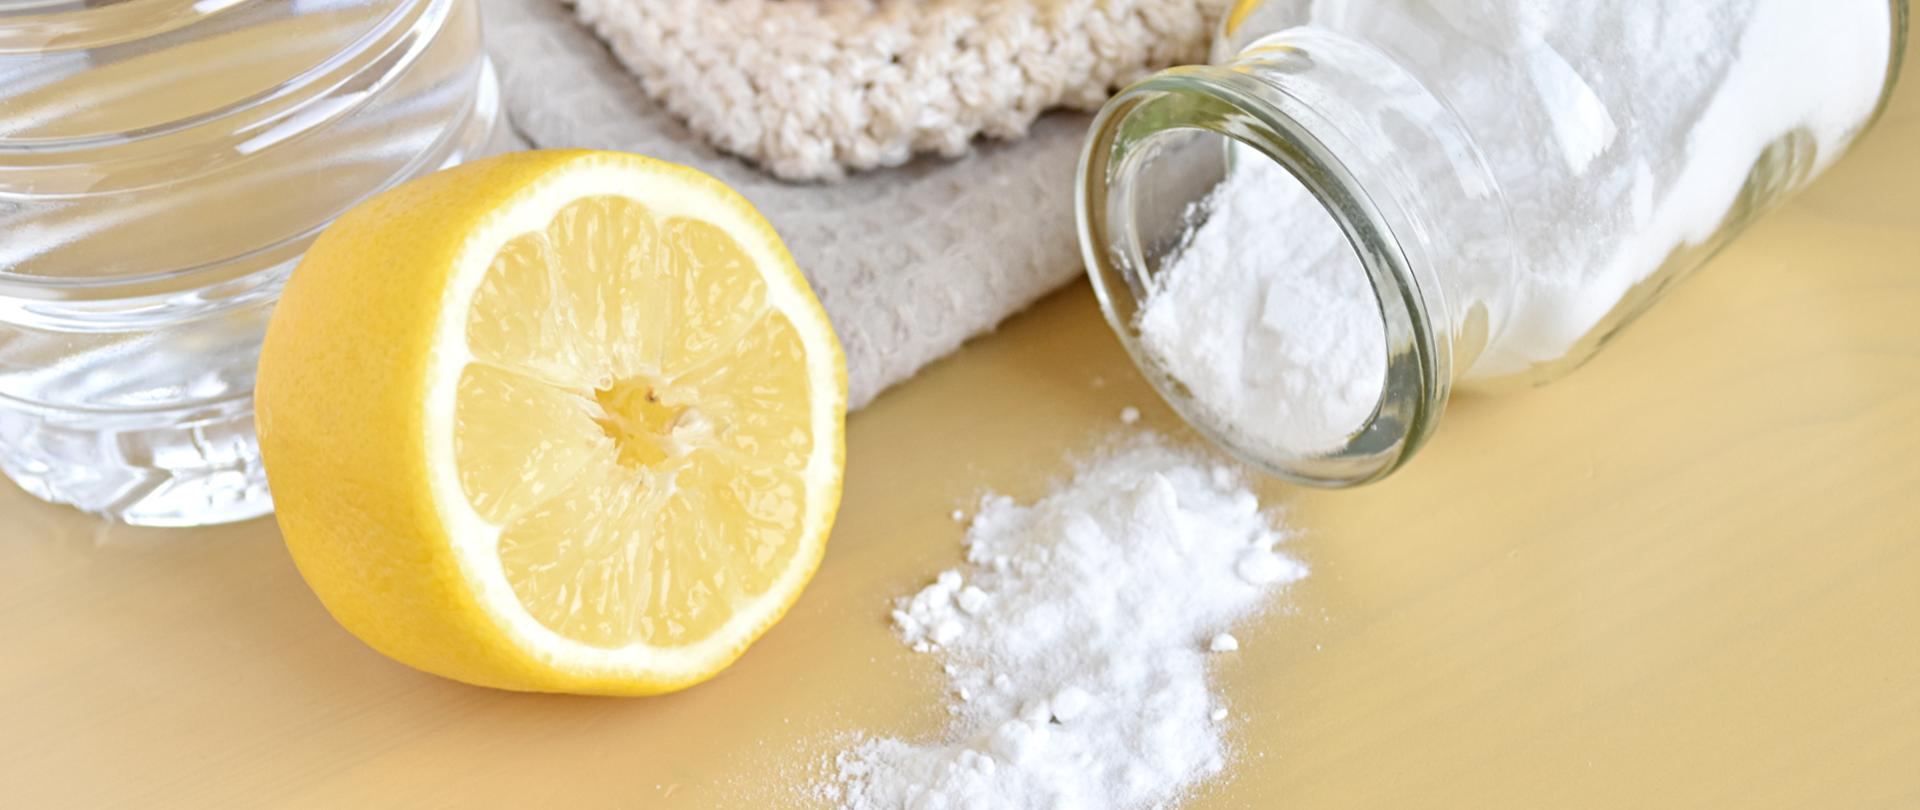 Natural products for home cleaning, lemon, baking soda and vineg